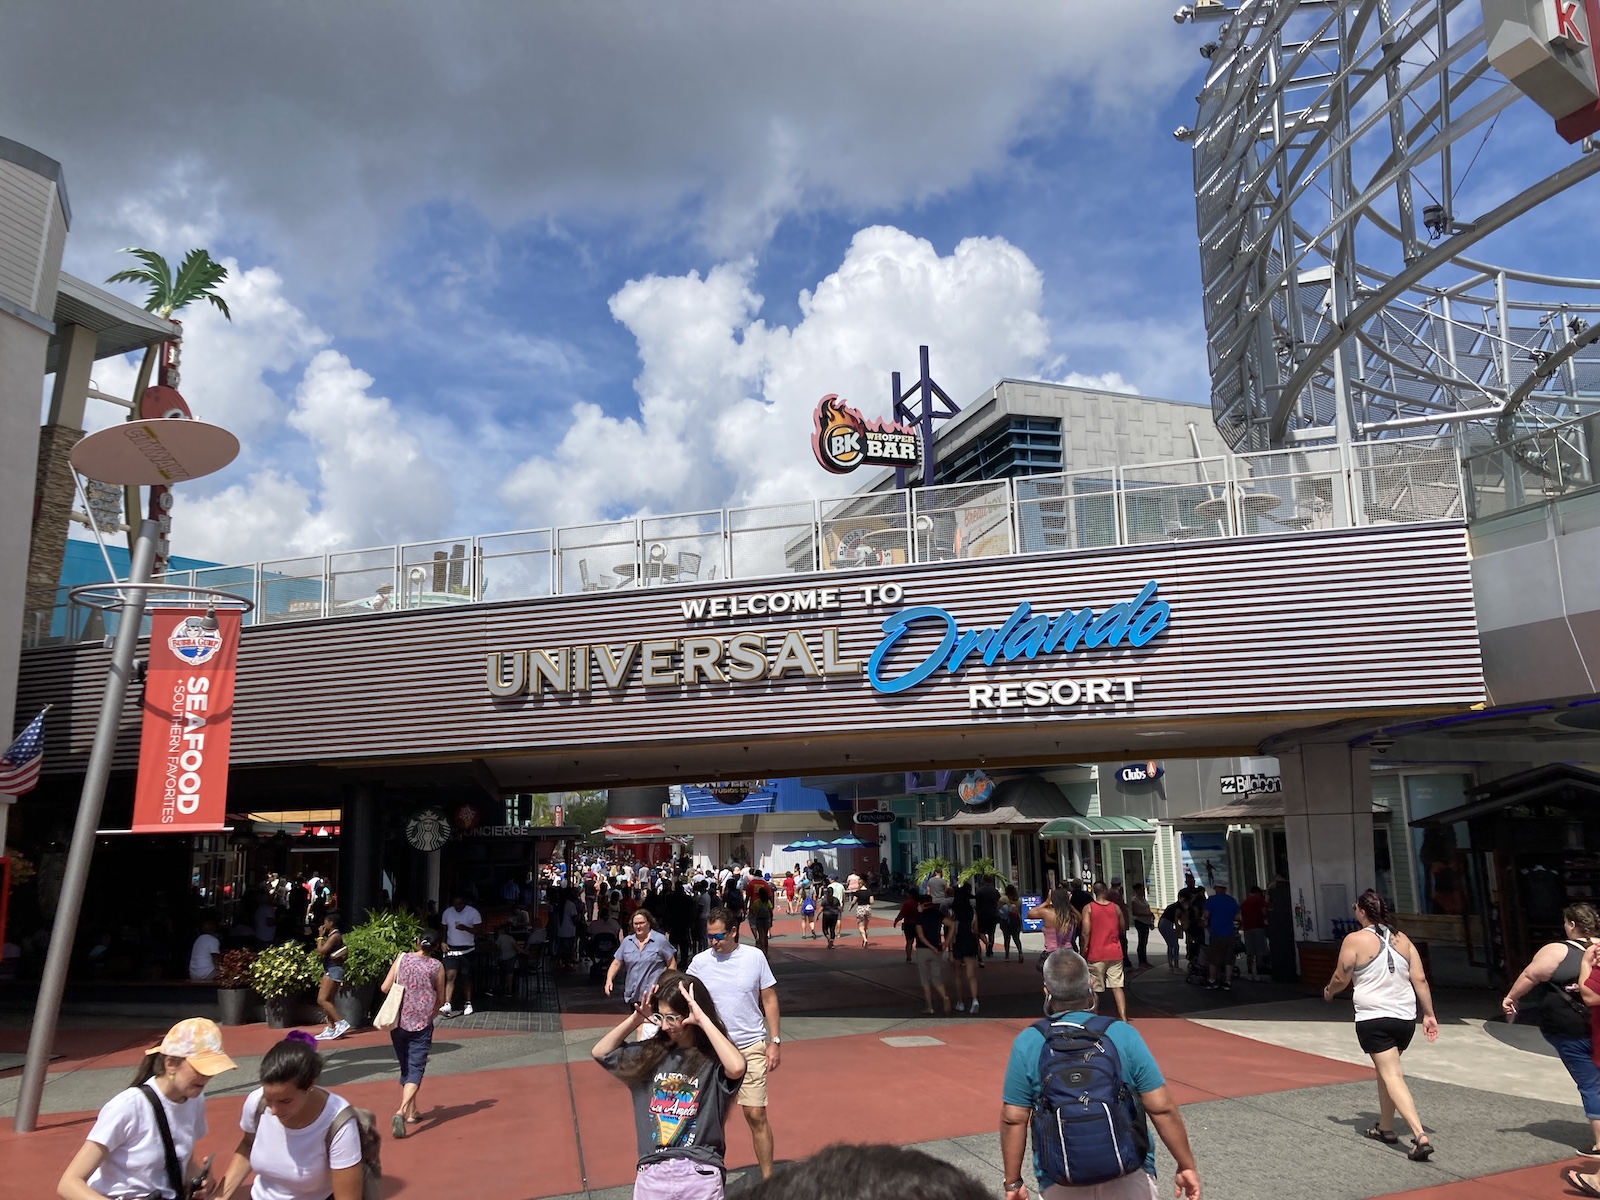 What's It Like At Universal Studios Orlando Now? My Recent Experience